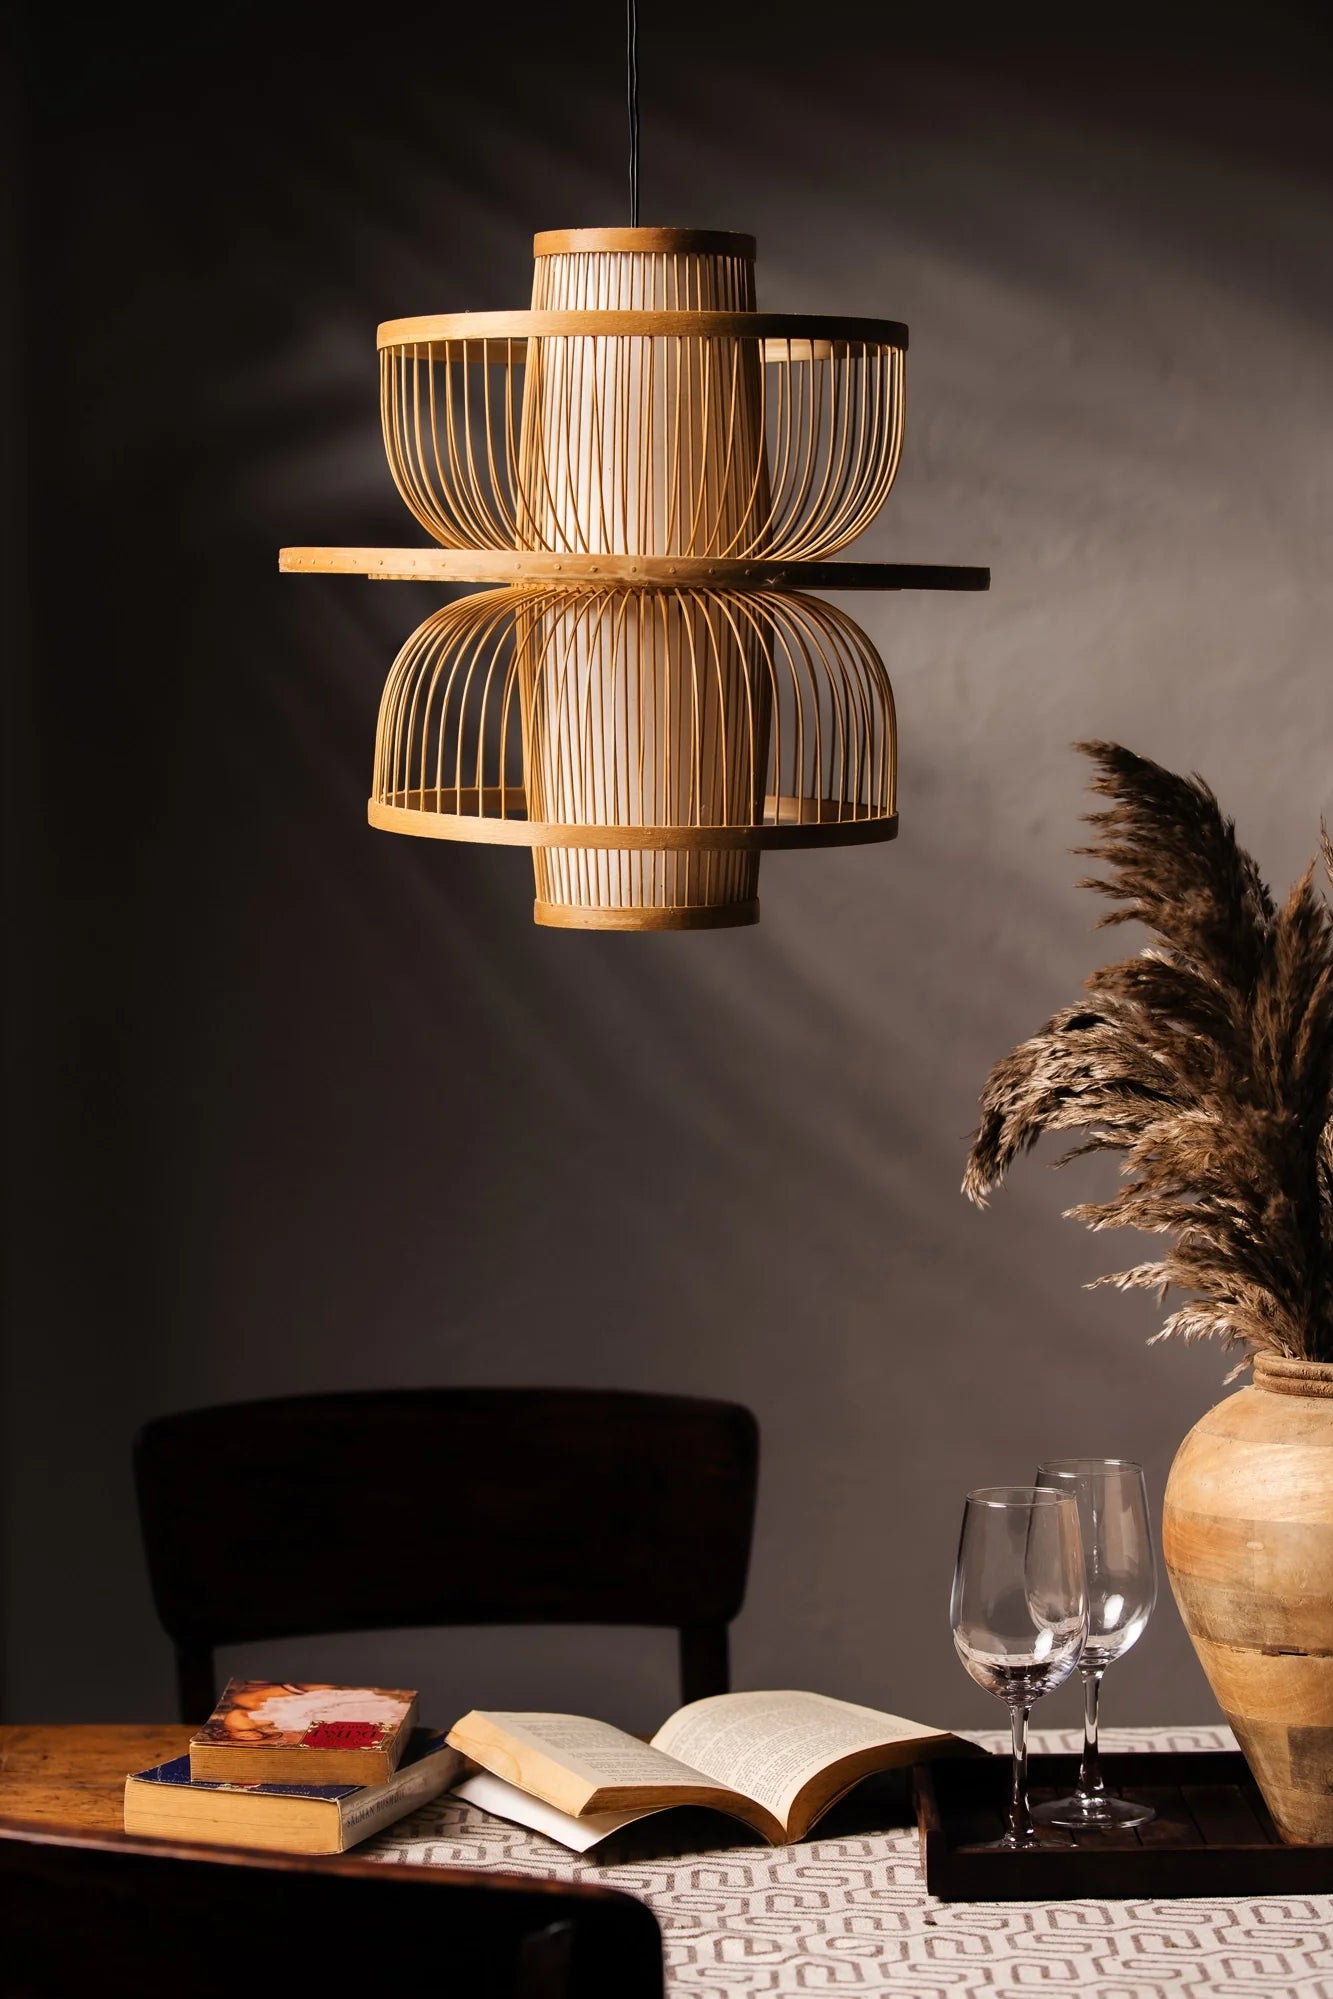 Fountain Bamboo Lampshade with light diffuser